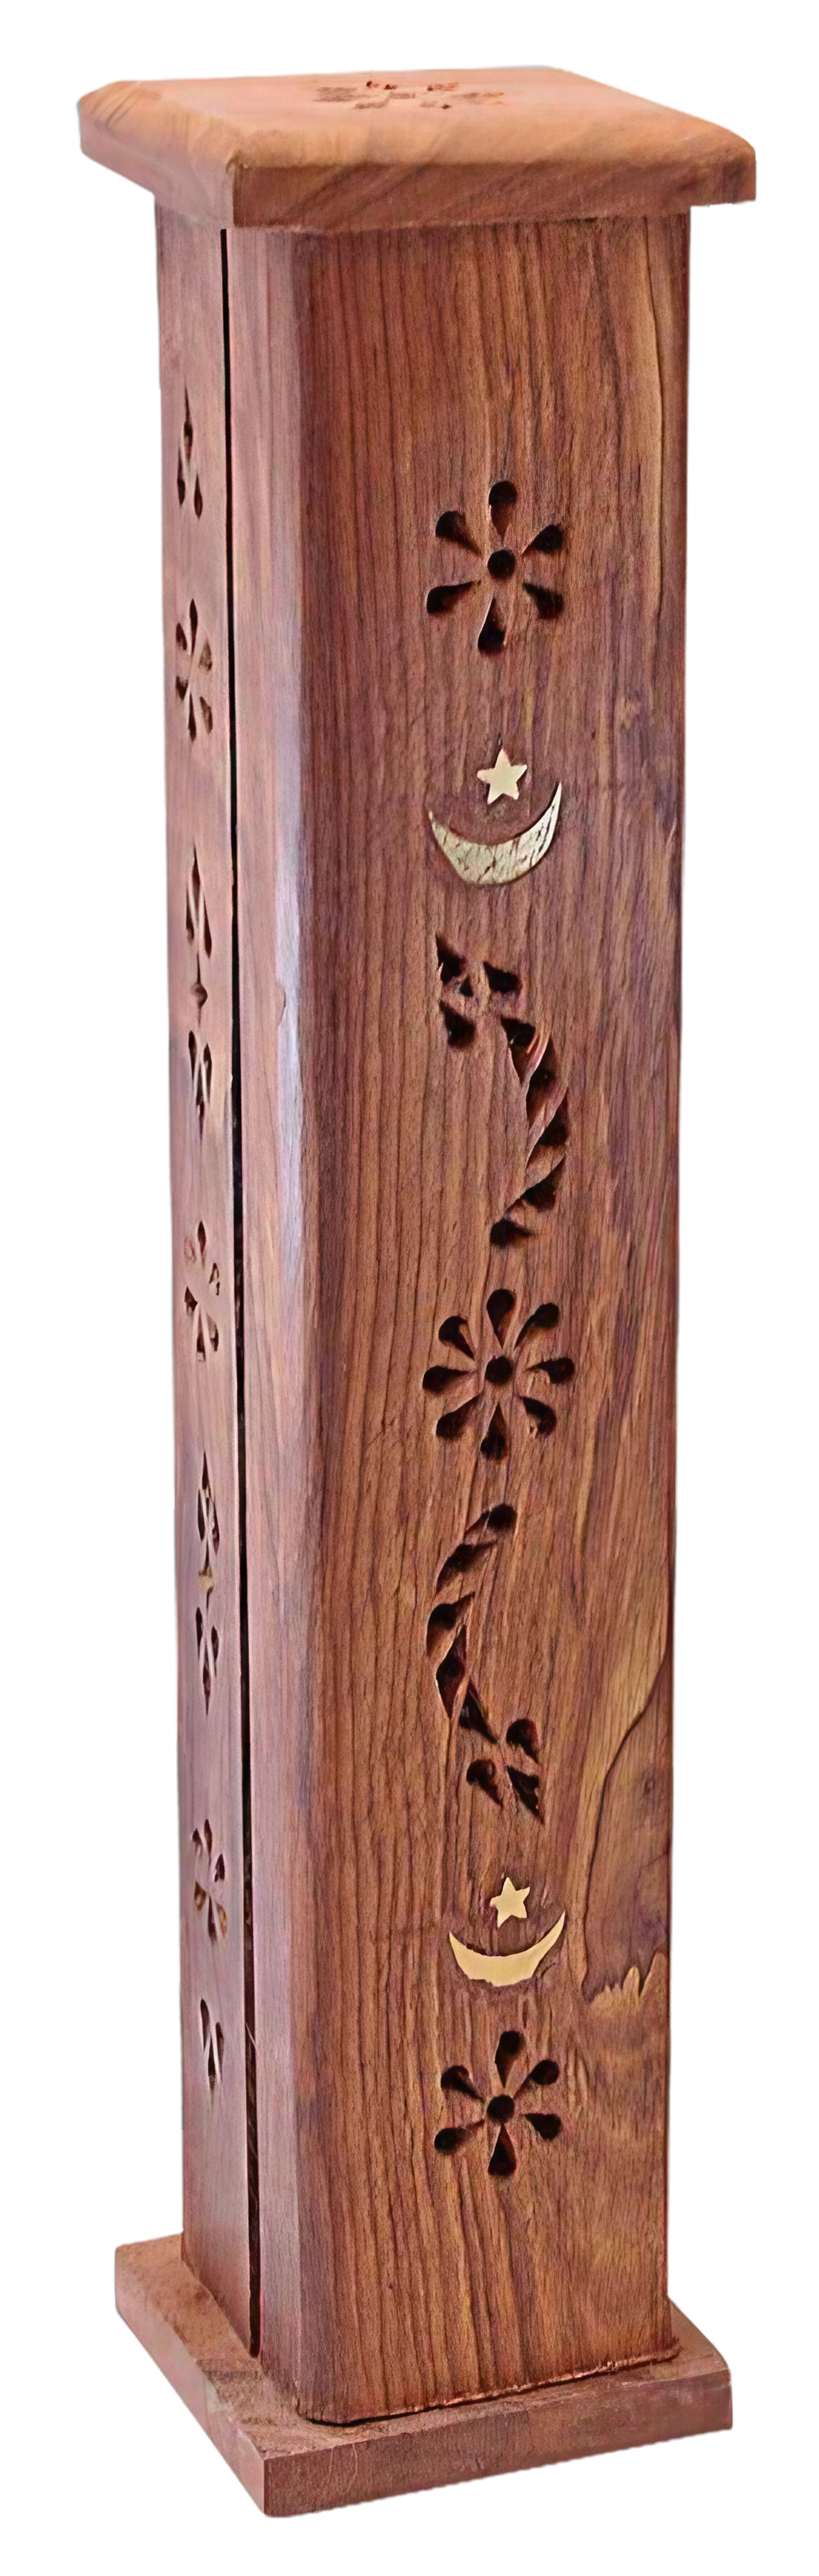 12" Moon & Star Wood Tower Incense Burner with intricate carvings, front view on white background